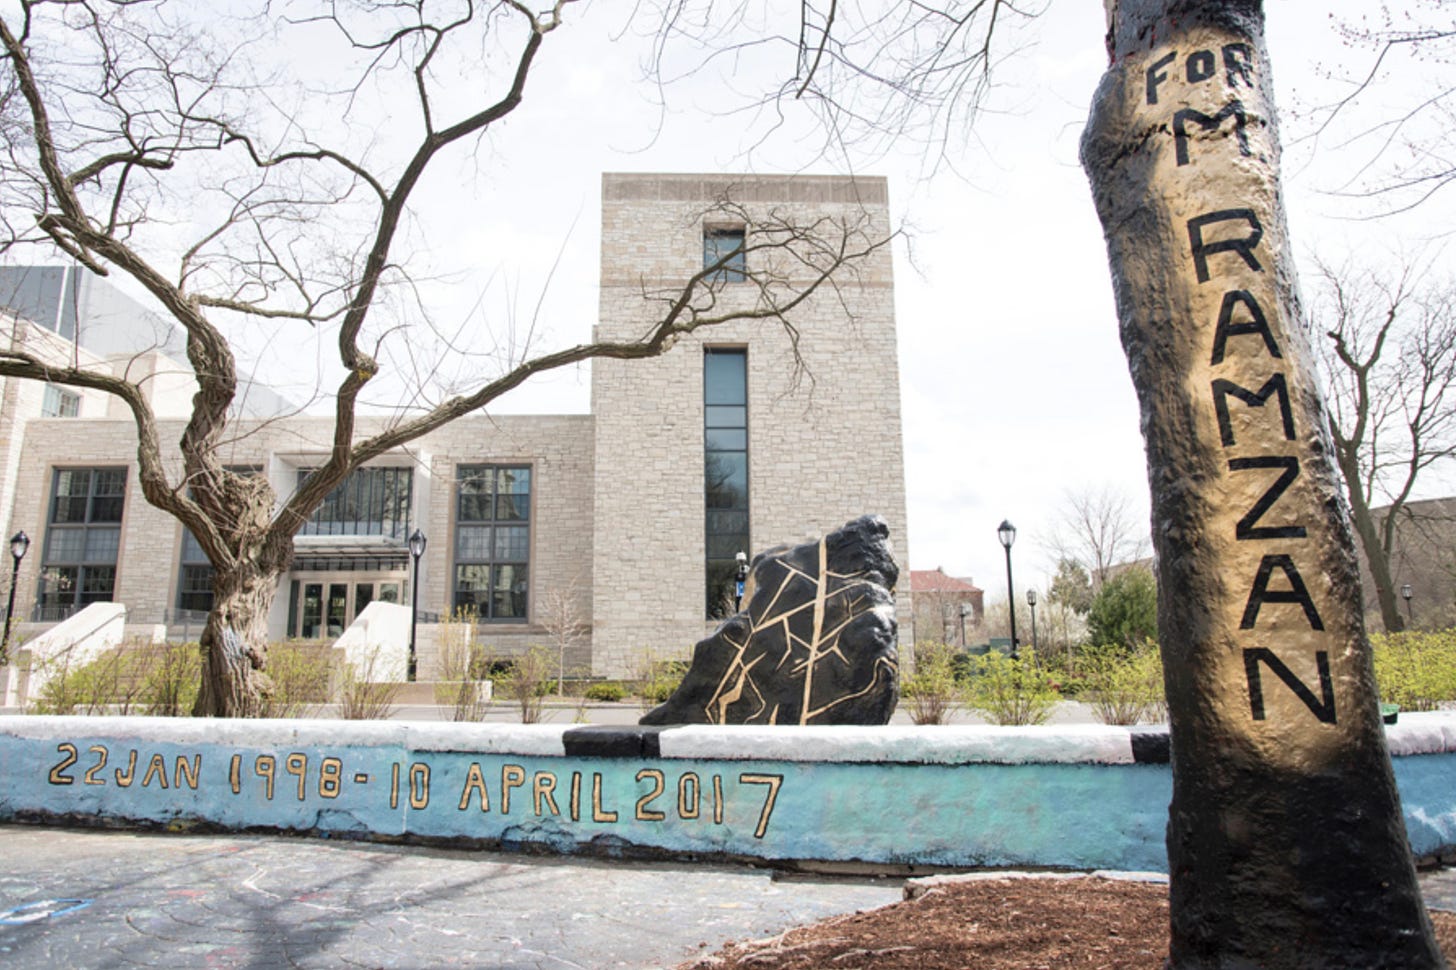 On Northwestern University’s campus, a rock stands in front of a modern architecture building. The rock is painted black with zigzags of gold. There is a wall in front of the rock painted bright sky blue, with 22 JAN 1998 - 10 APRIL 2017 painted in gold and outlined in black. A tree stands in the foreground, with gold spraypainted on the truck. FOR M. RAZMAN stands out from the tree trunk, bold agains the metallic paint.